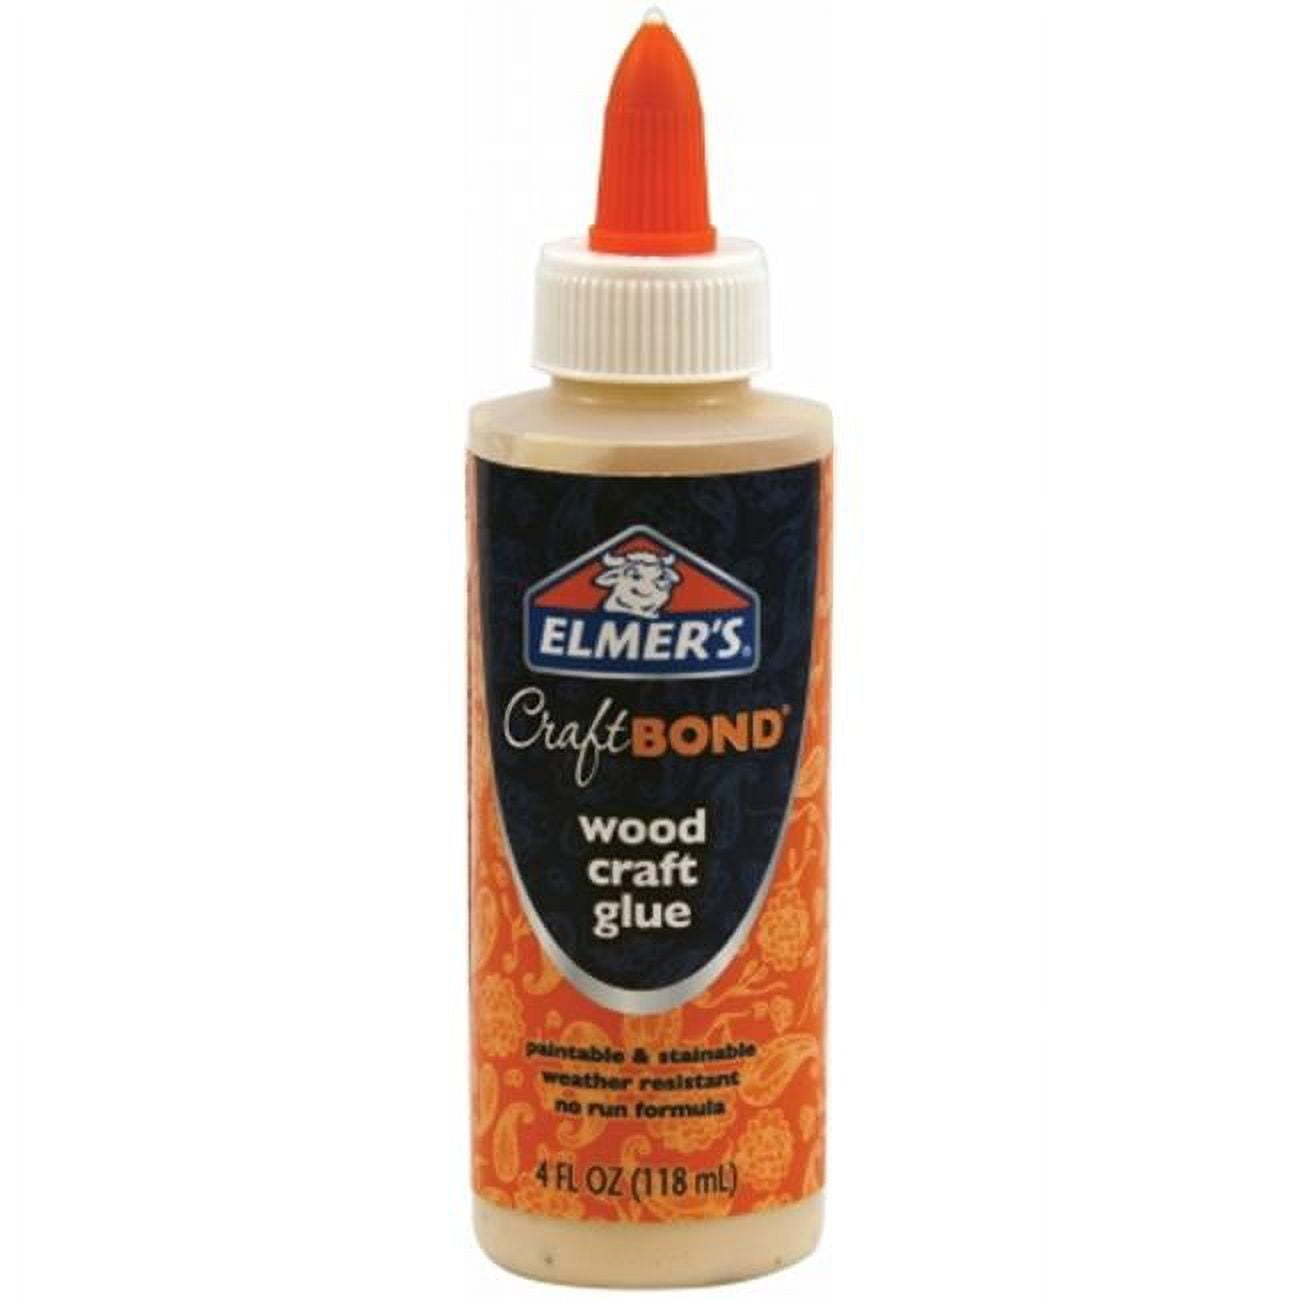 Elmer's Craft Bond Quick Dry Glue Only $1.74 Shipped on